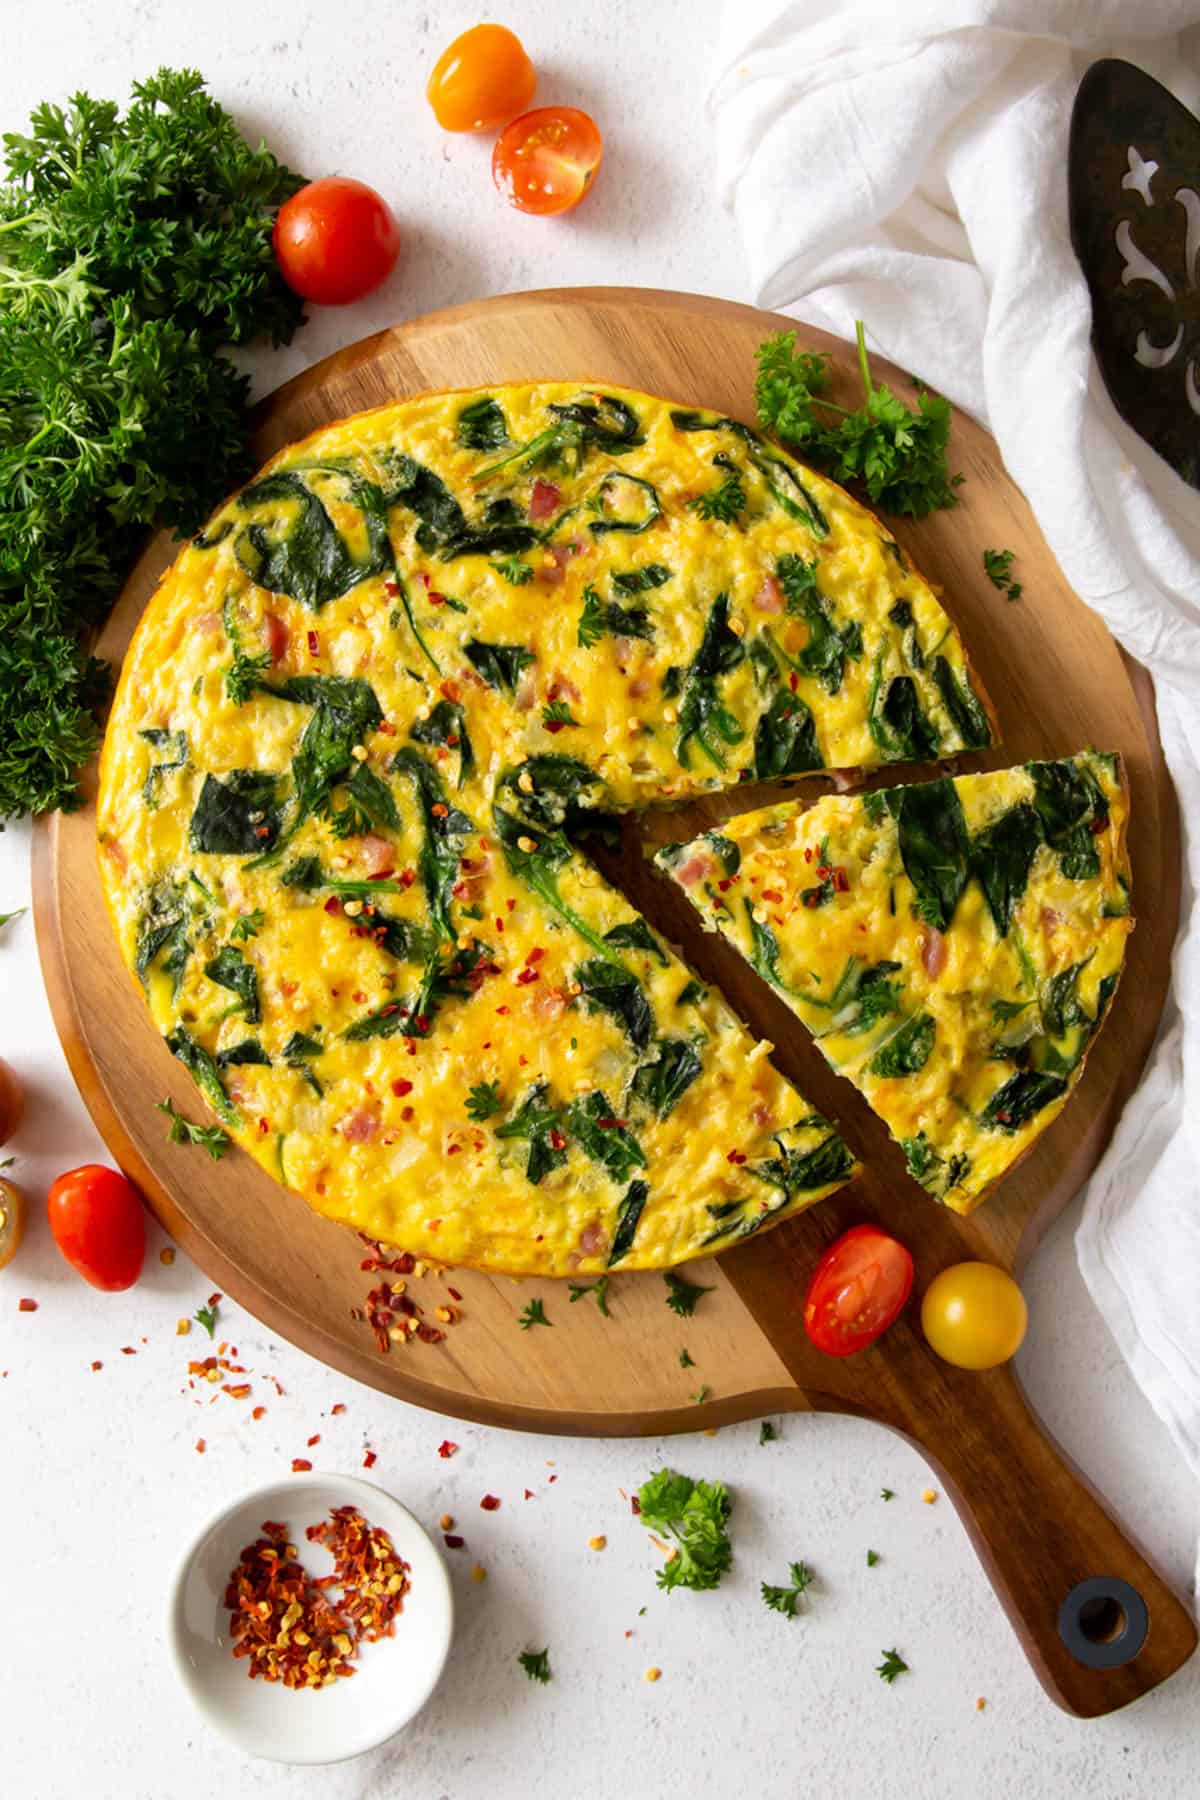 ham and spinach frittata on a cutting board with tomatoes and parsley on the side as garnish